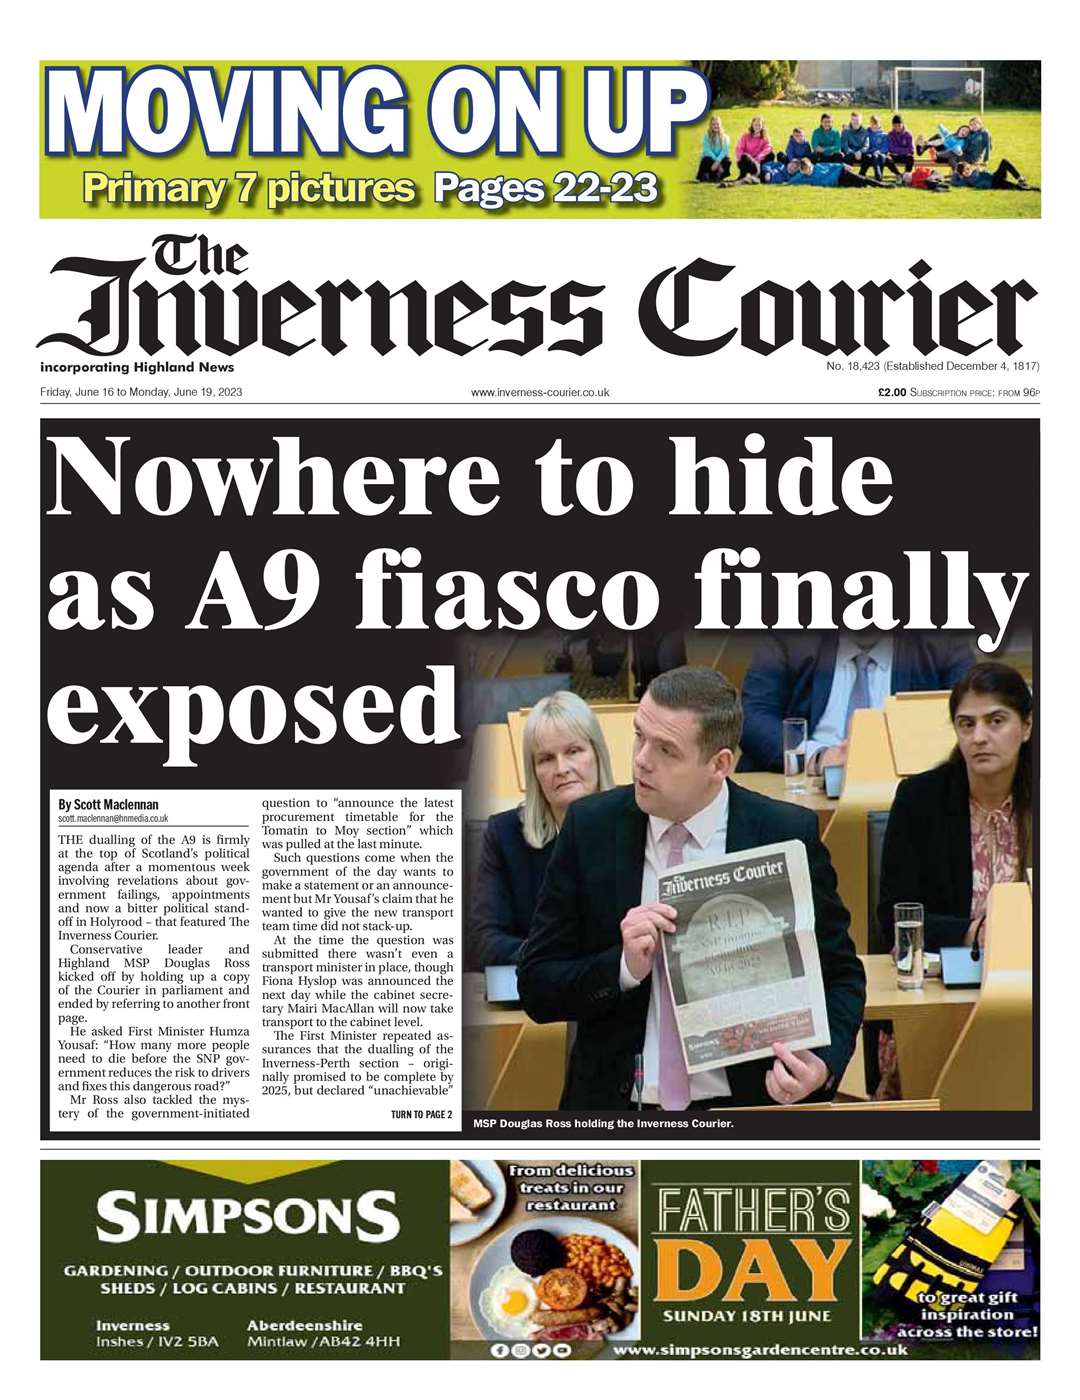 The Inverness Courier, June 16, front page.